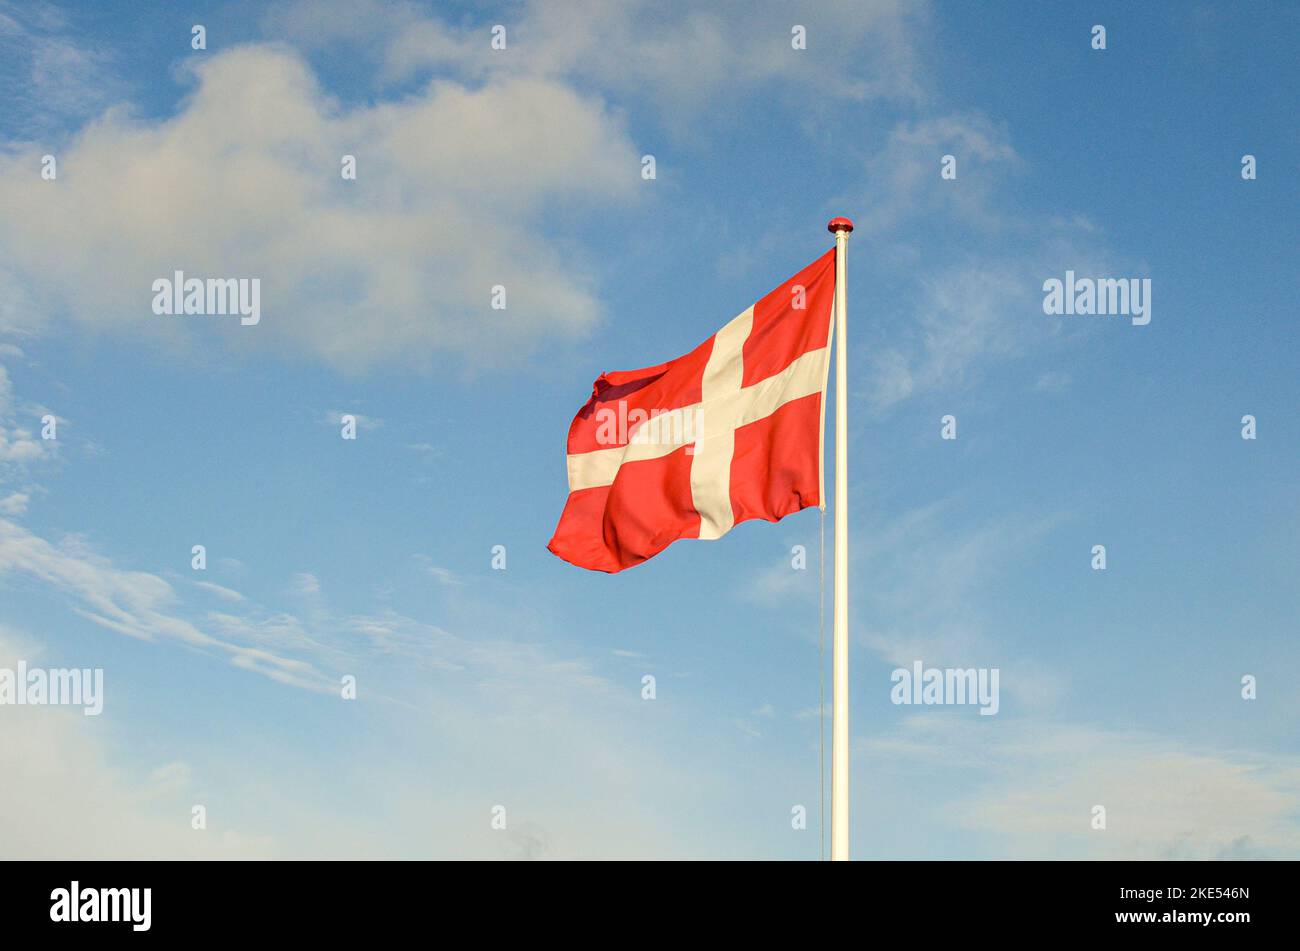 Danish flag with blue sky and light clouds Stock Photo